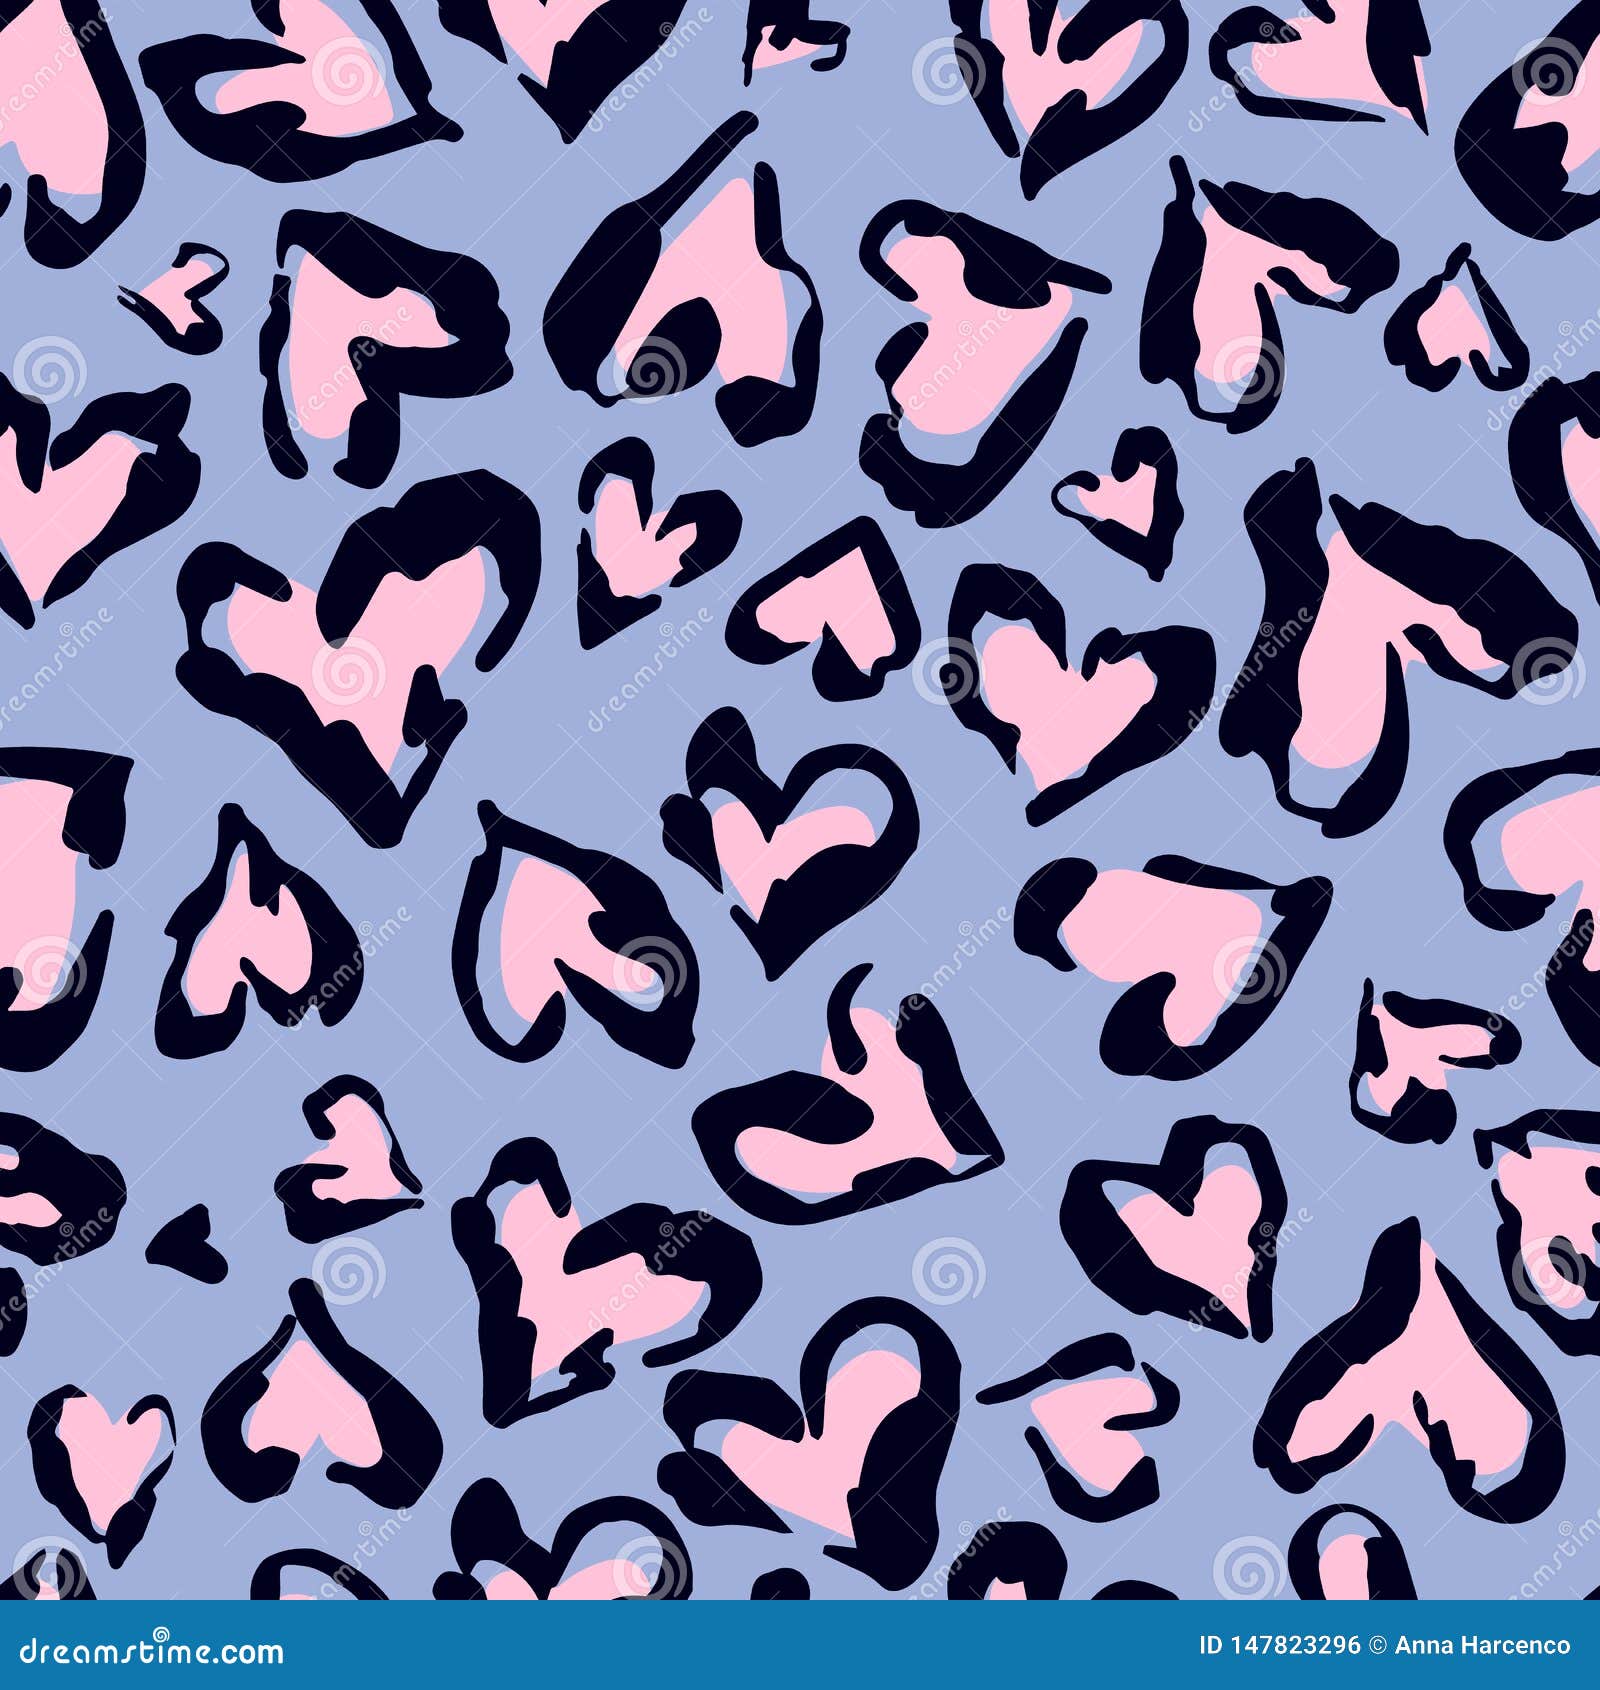 https://thumbs.dreamstime.com/z/leopard-pattern-seamless-print-abstract-repeating-heart-skin-imitation-can-be-painted-clothes-fab-fabric-147823296.jpg